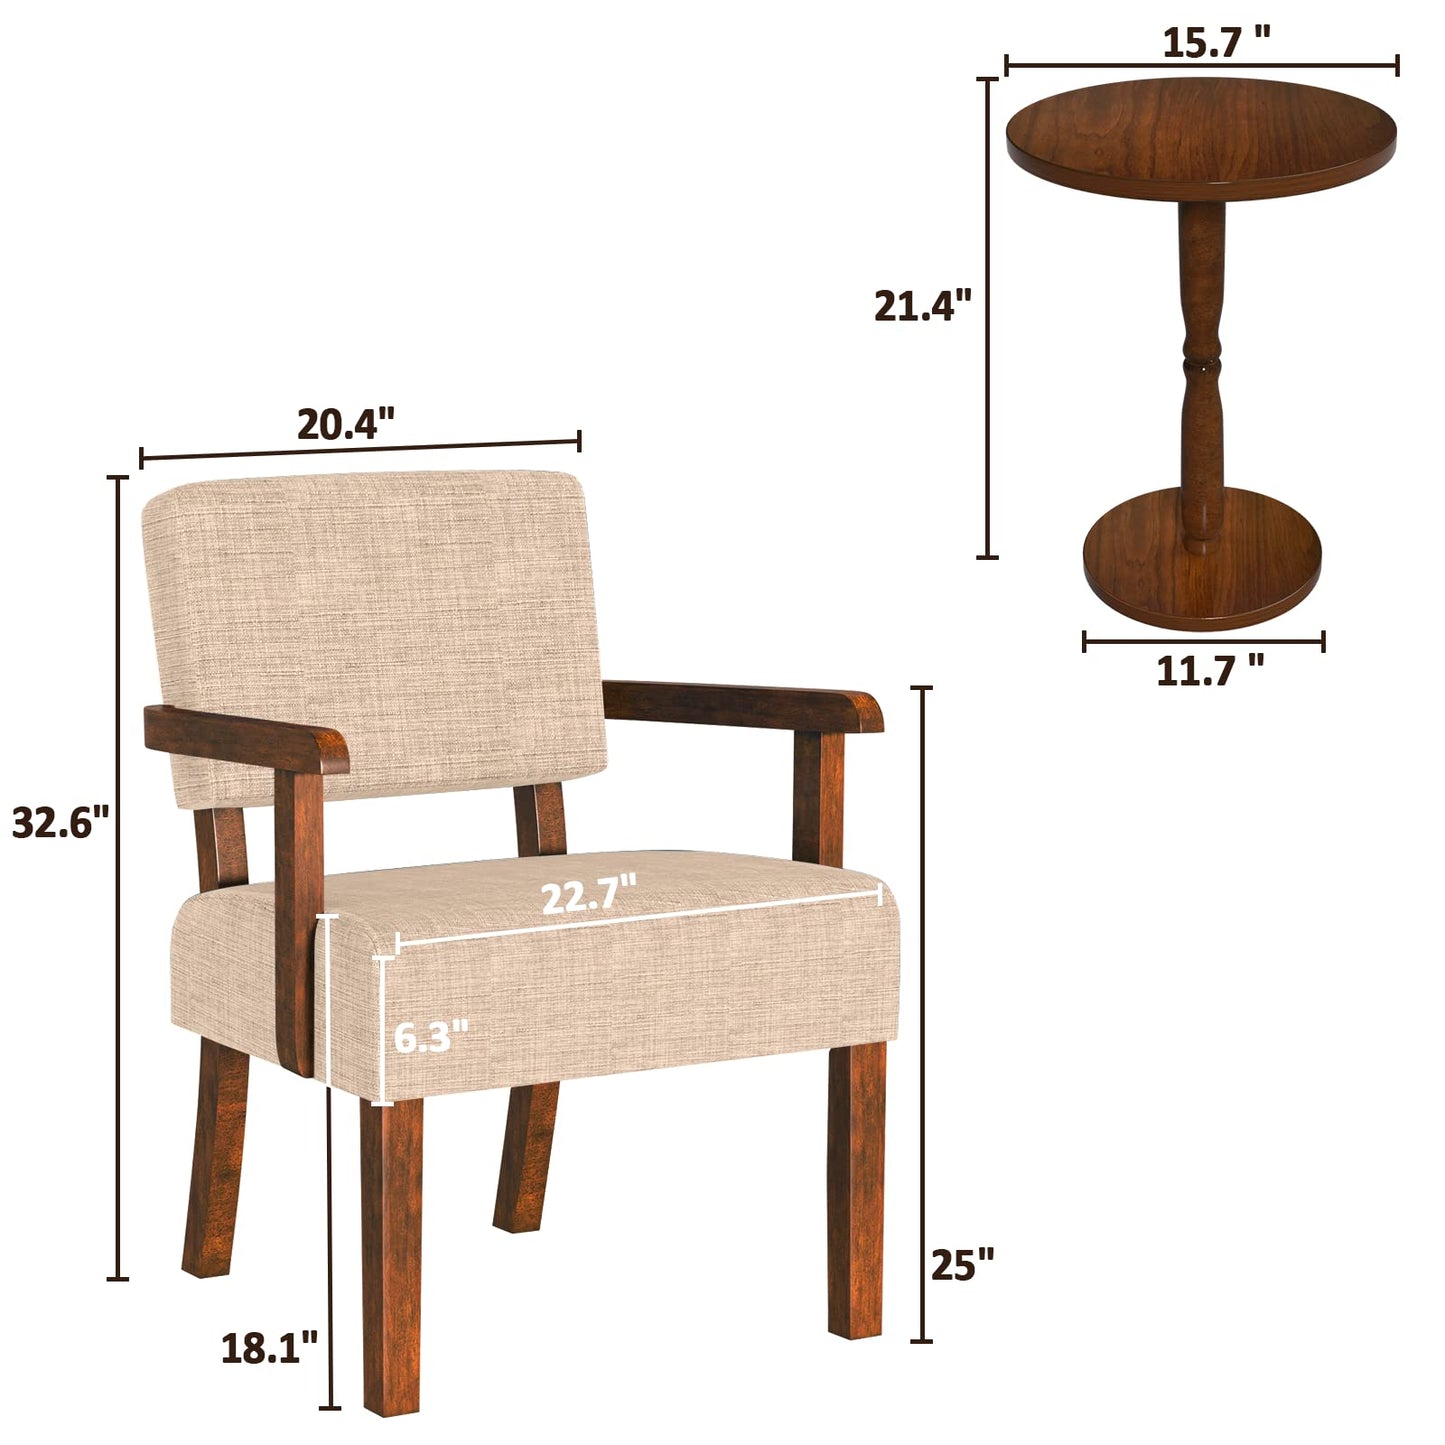 FAGAGA Accent Chair Set of 2 with Table, Living Room Chairs with Soft Seat and Armrests for Living Room Bedroom Reading Room Waiting Room (Beige) (AC01)